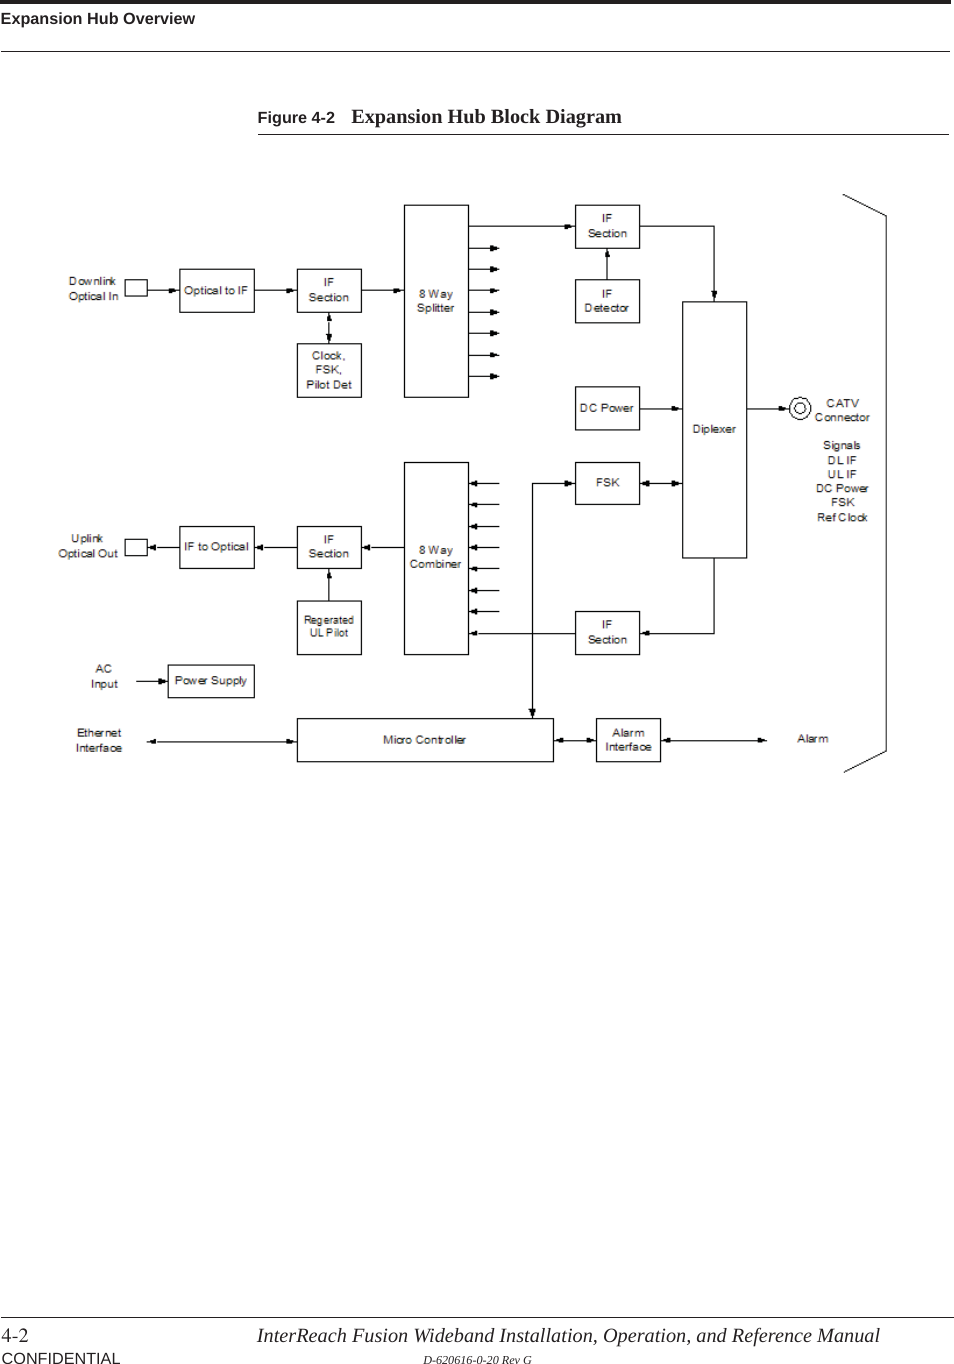 Expansion Hub Overview4-2 InterReach Fusion Wideband Installation, Operation, and Reference Manual CONFIDENTIAL D-620616-0-20 Rev GFigure 4-2 Expansion Hub Block Diagram